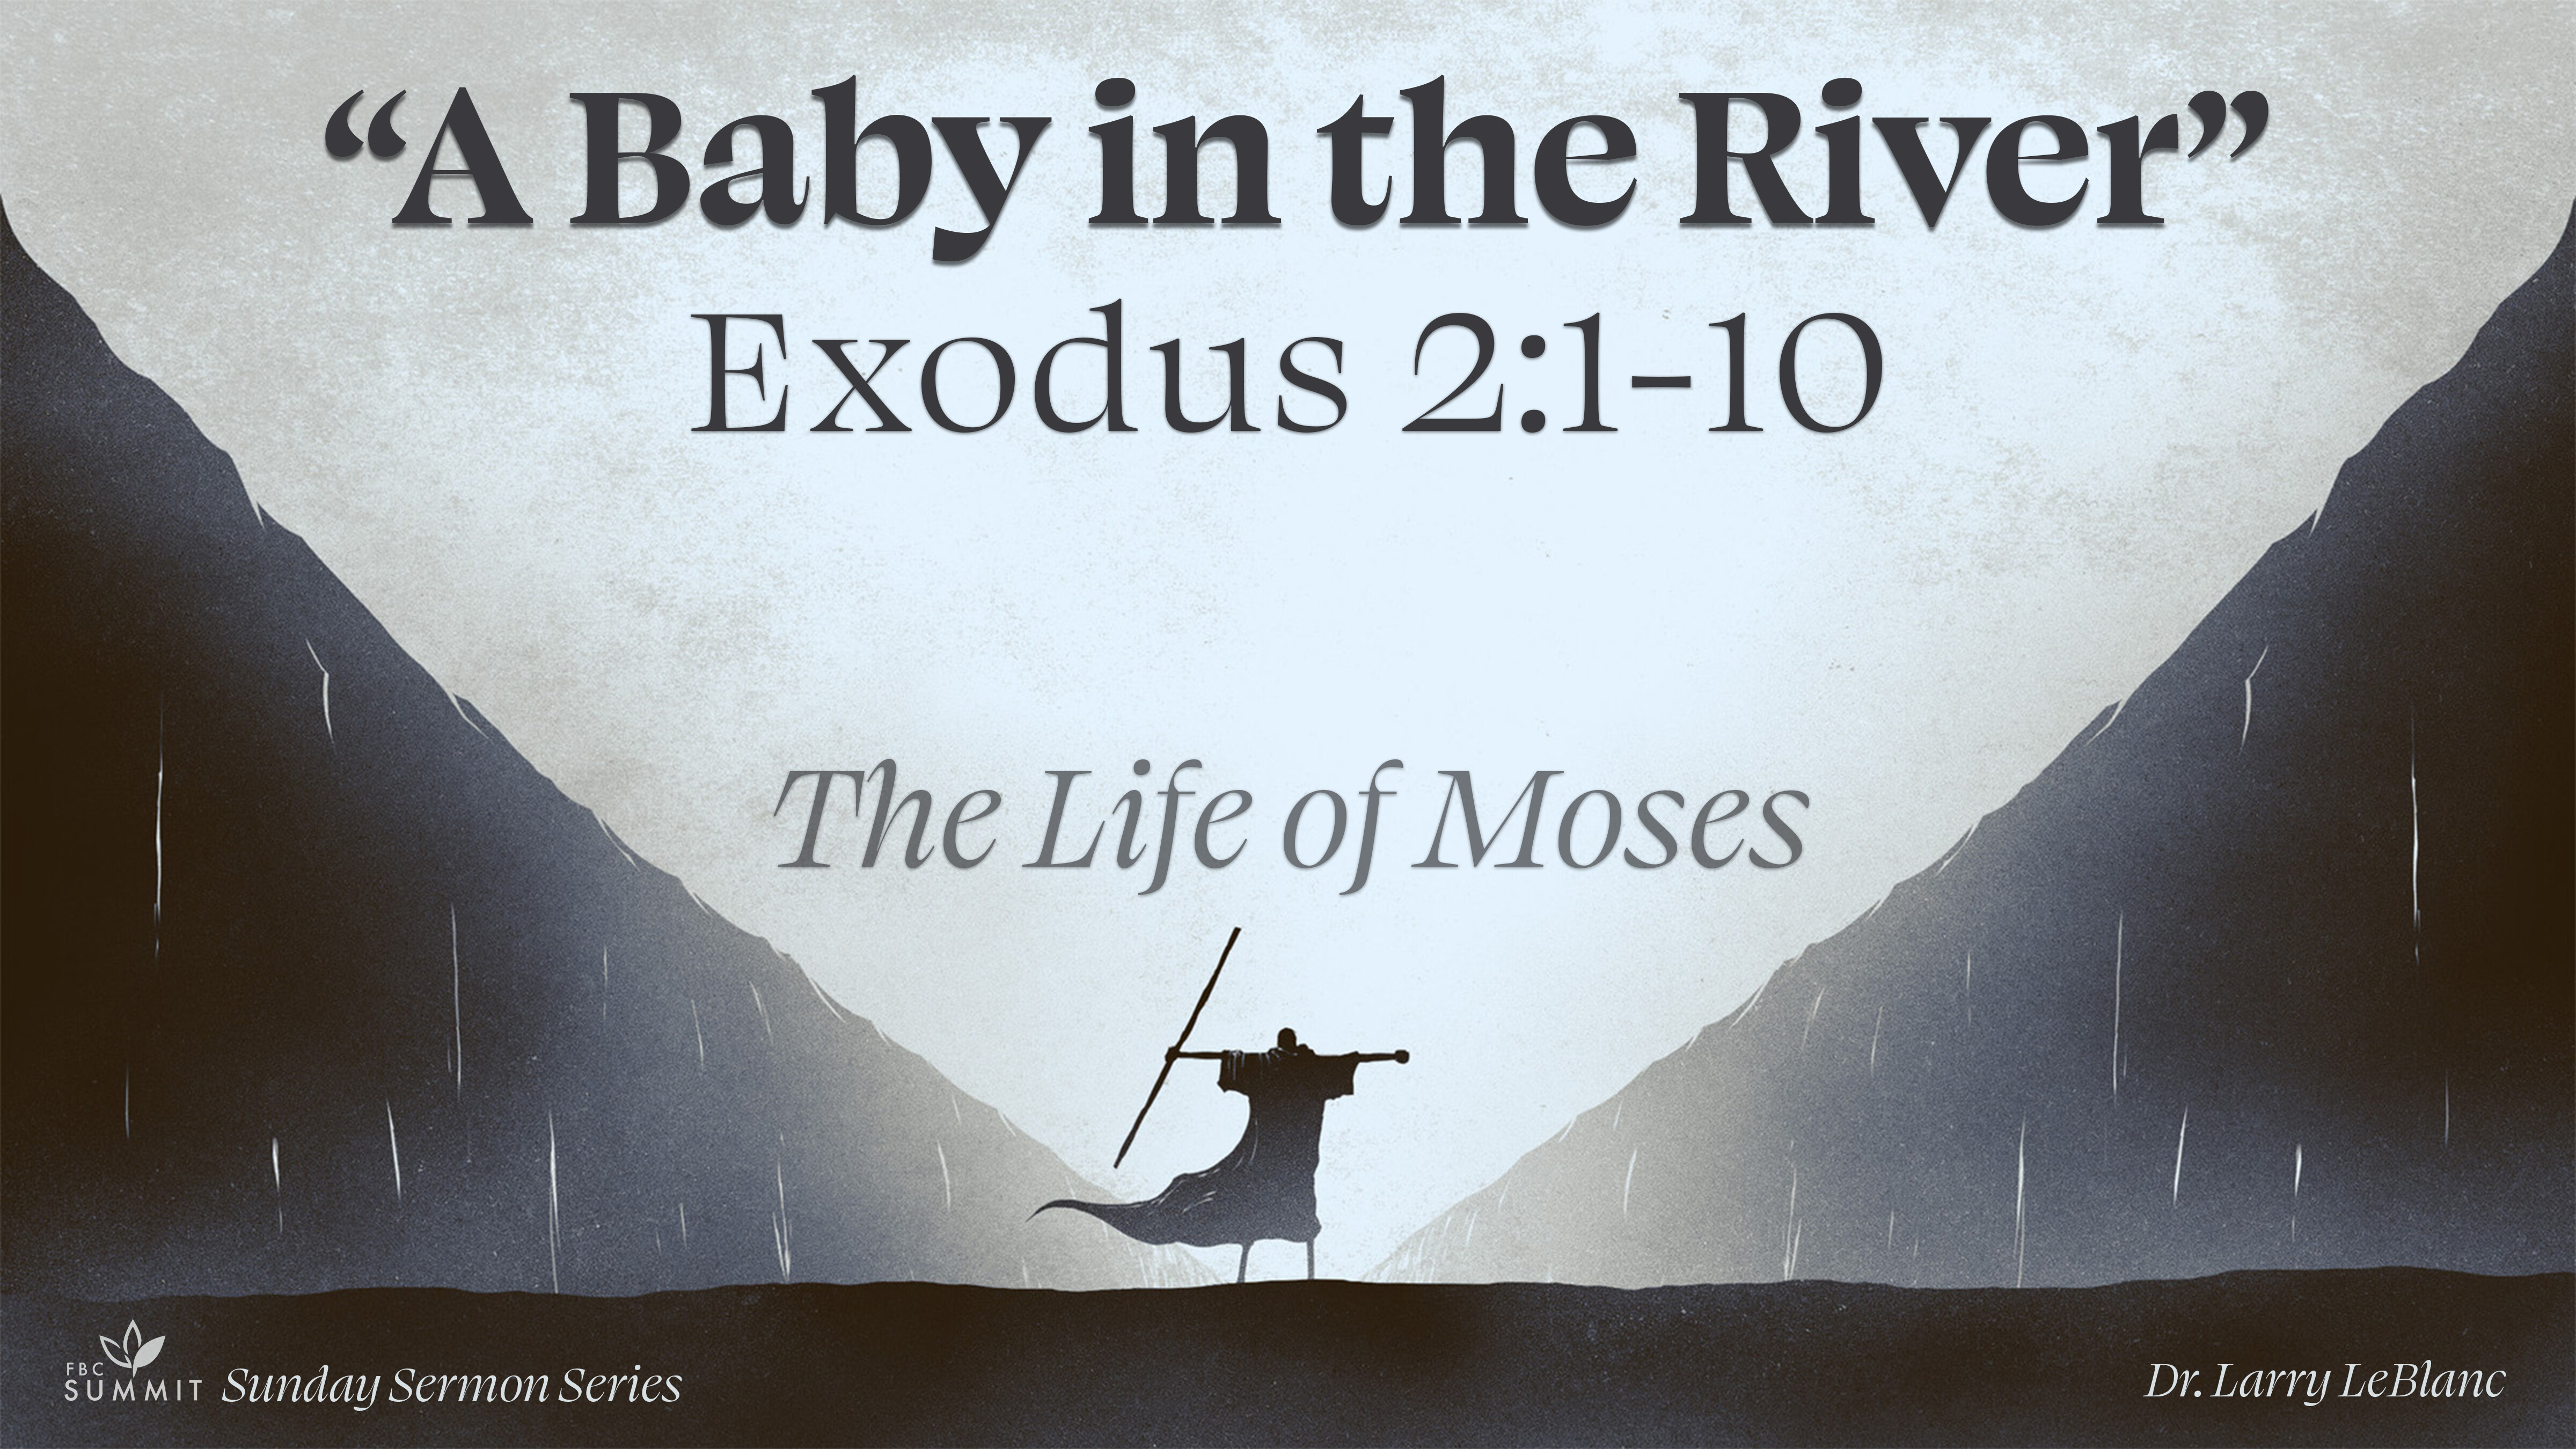 "A Baby in the River" Exodus 2:1-10 // Dr. Larry Leblanc